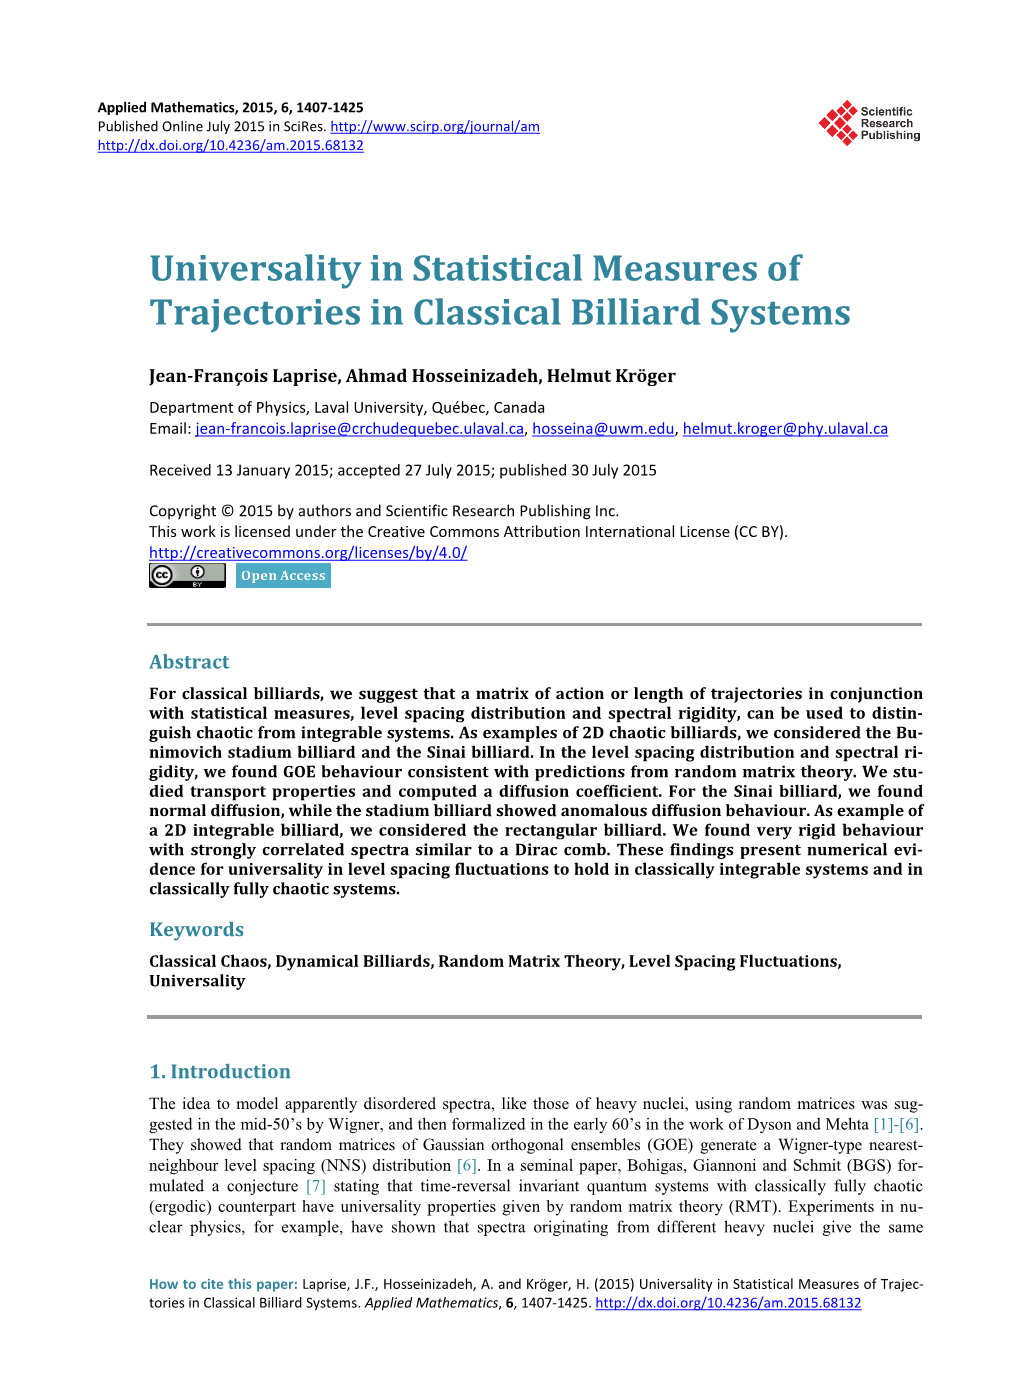 Universality in Statistical Measures of Trajectories in Classical Billiard Systems